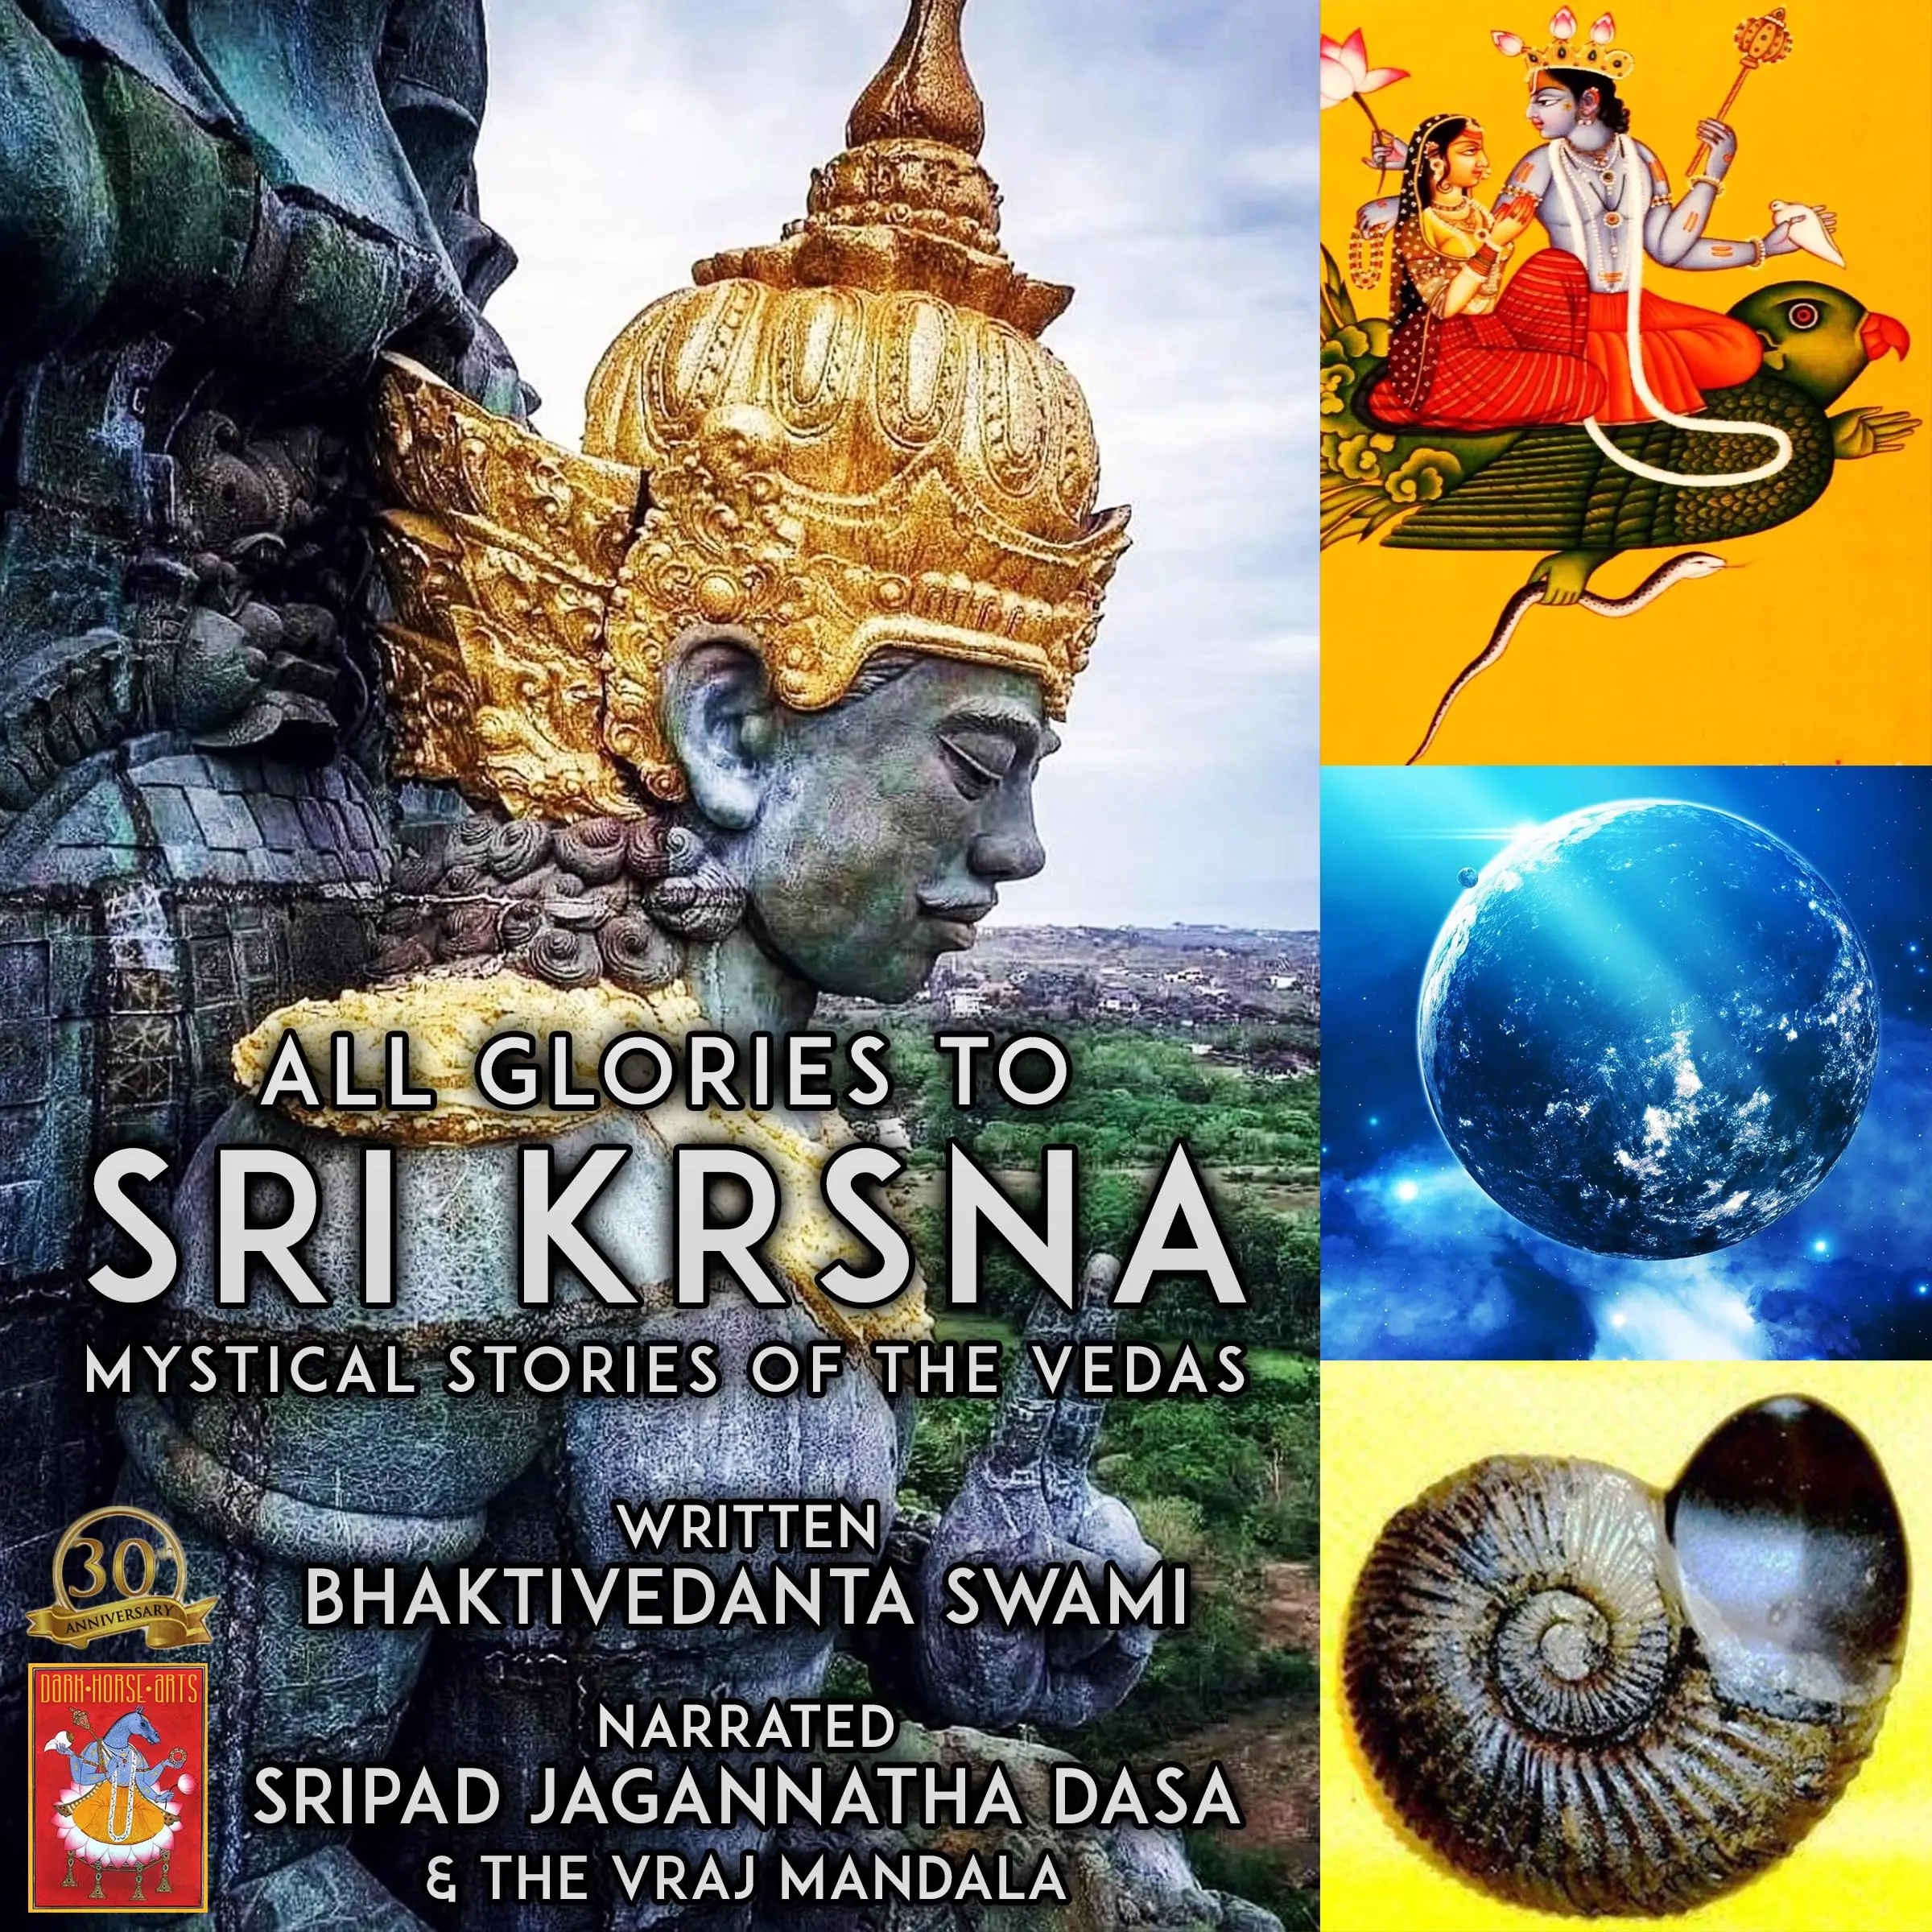 All Glories To Sri Krsna Mystical Stories Of The Vedas Audiobook by Bhaktivedanta Swami